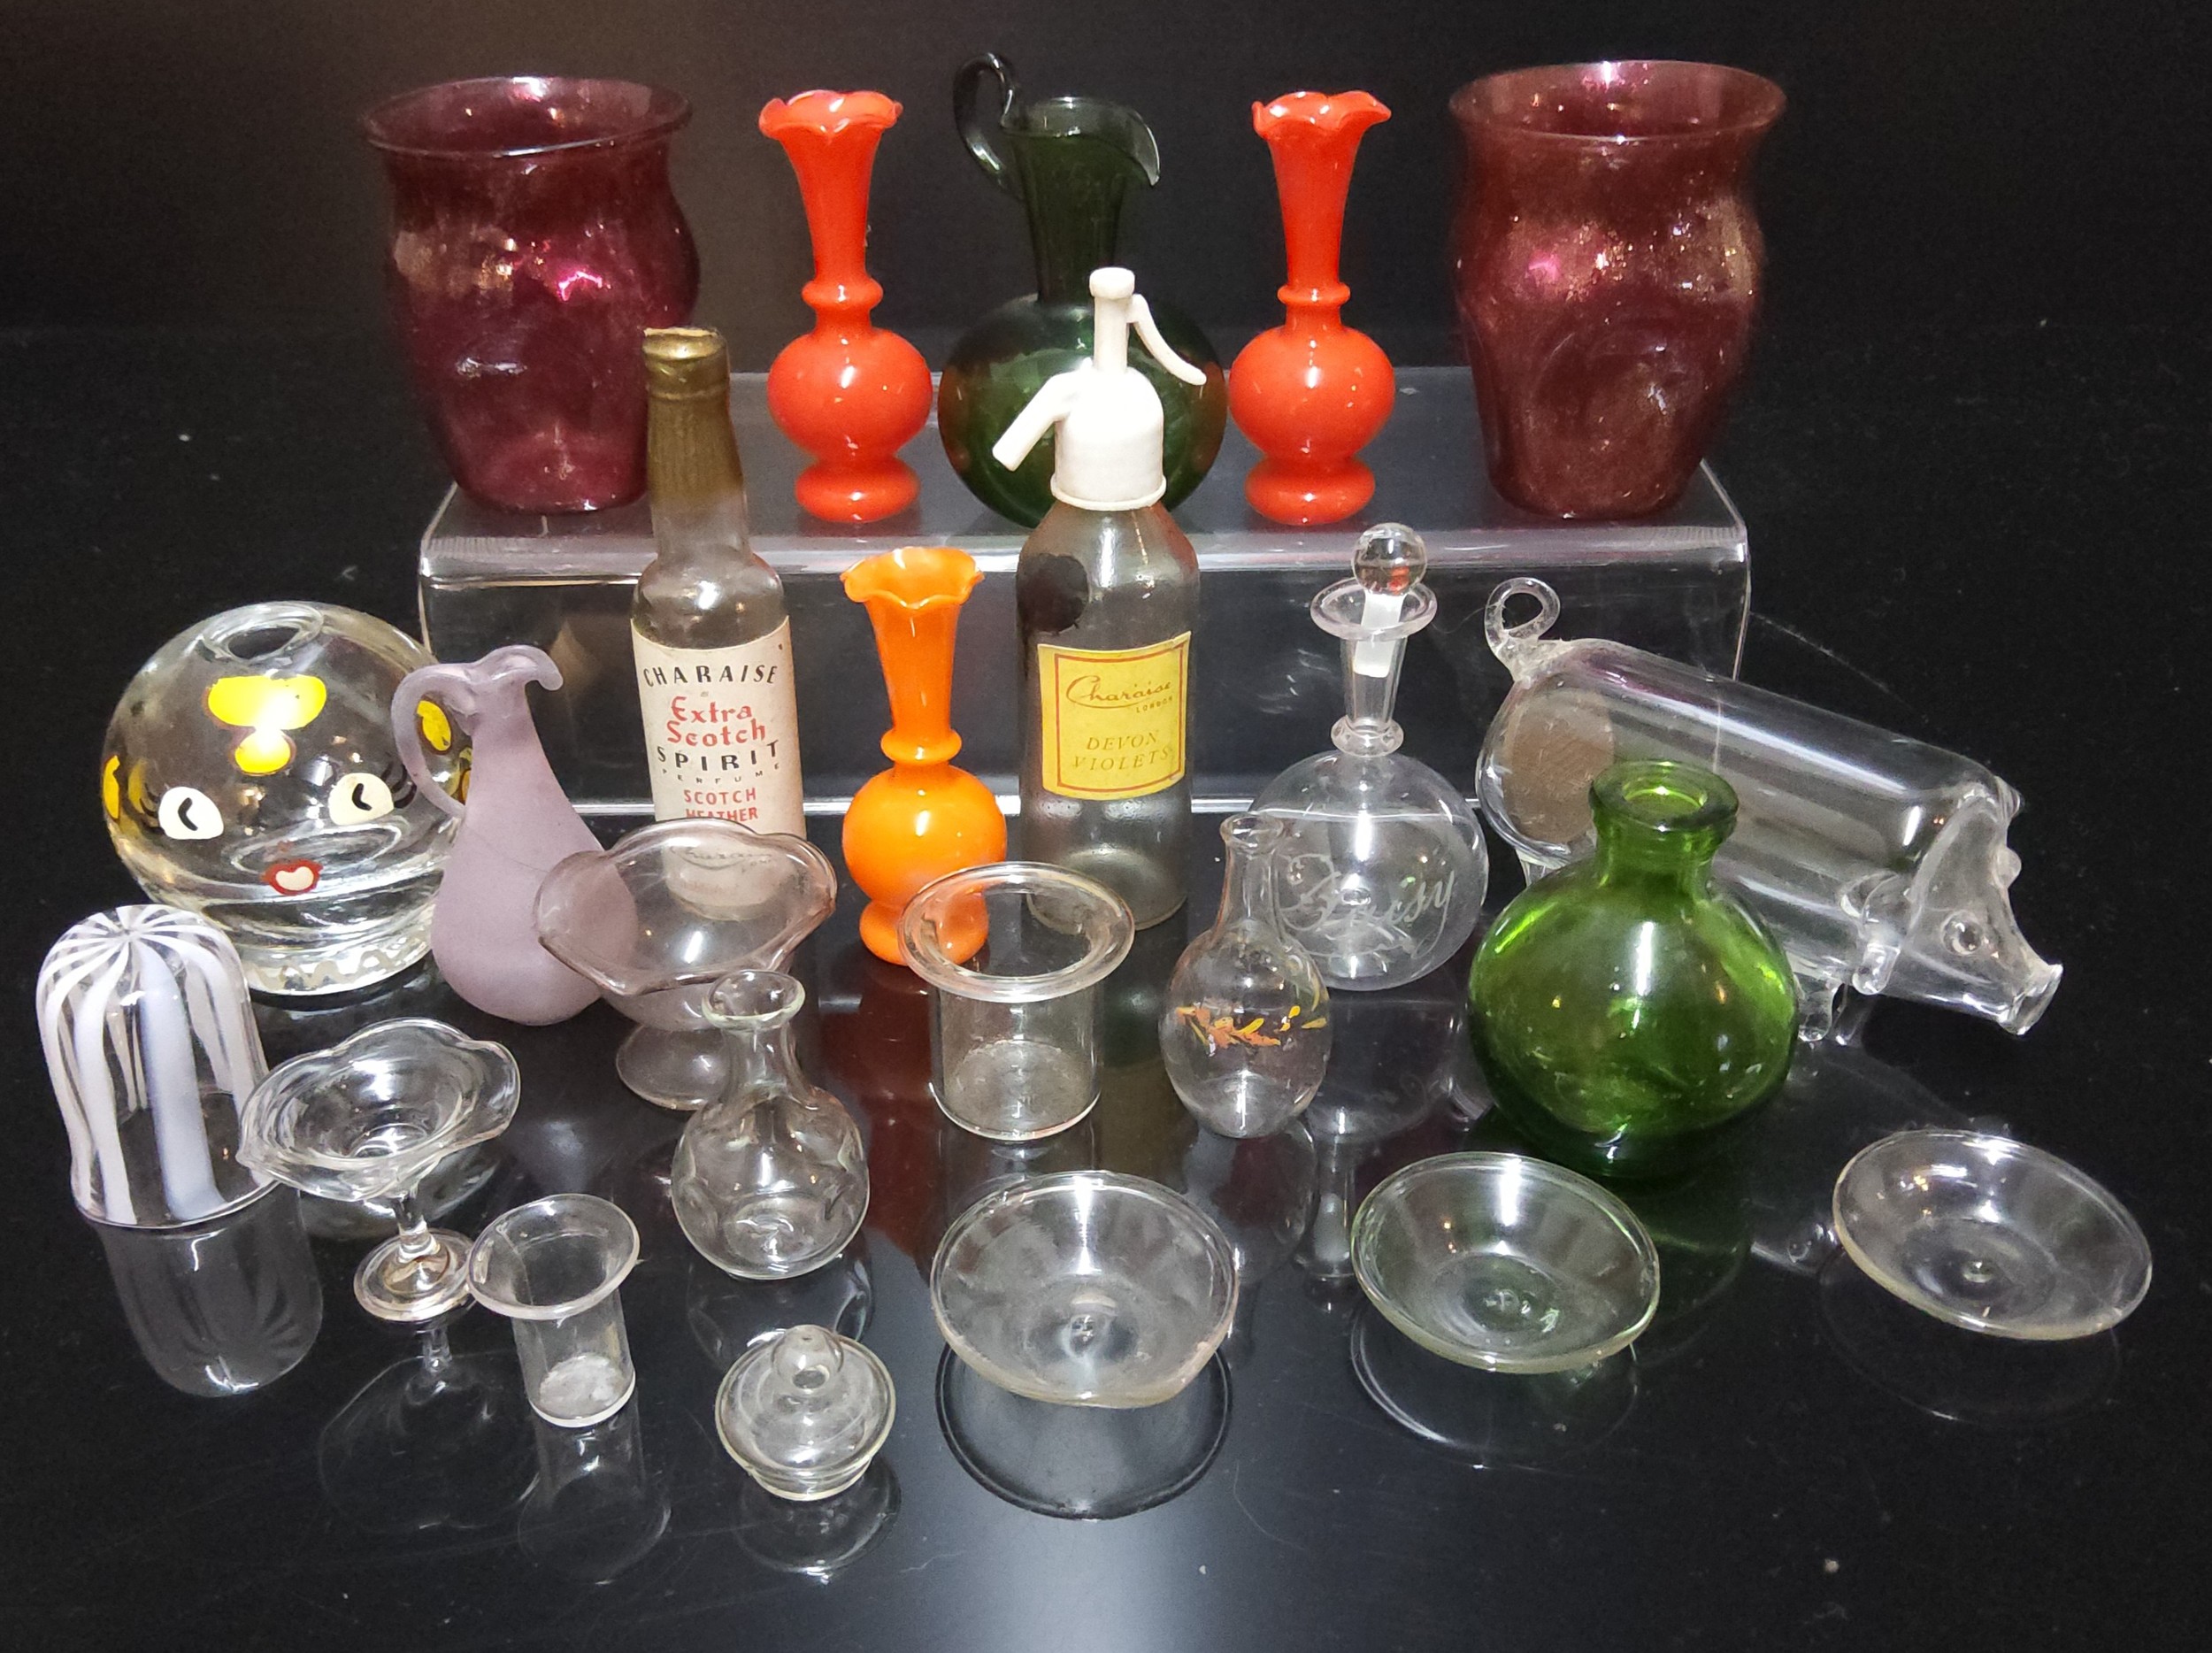 Dolls House Accessories - Victorian and later glassware, including Venetian glass vases, decanters,